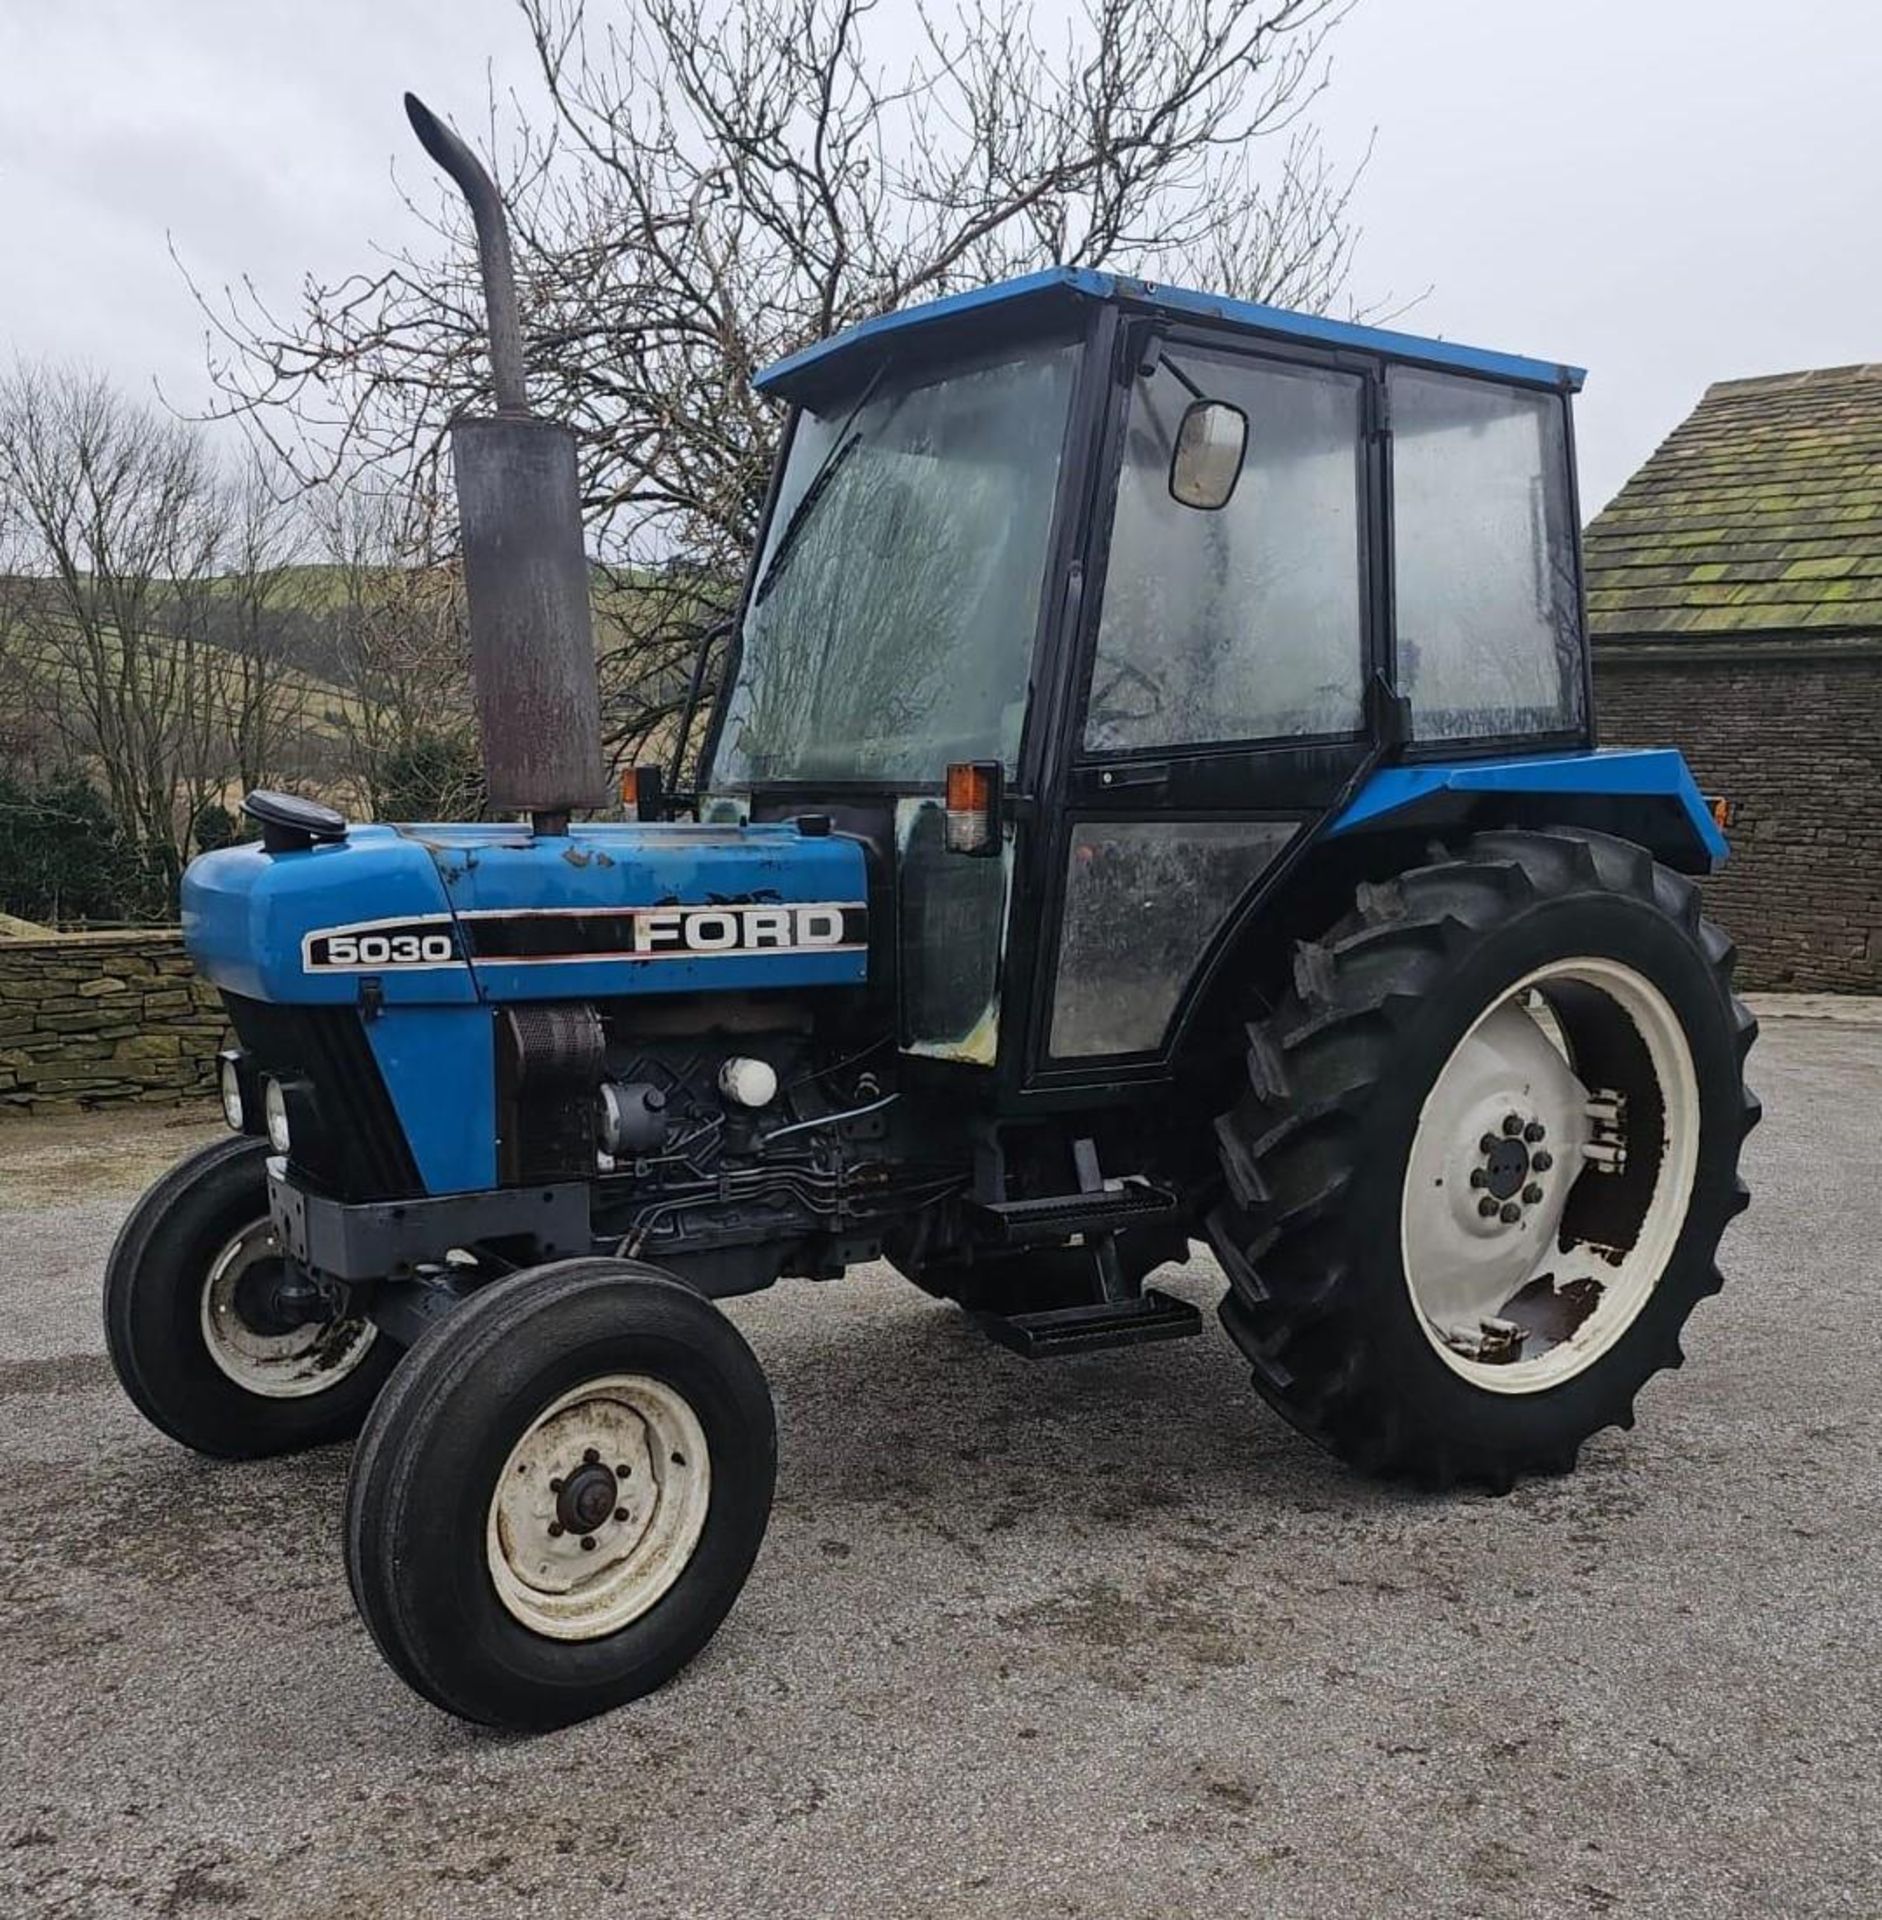 FORD 5030 2 WHEEL DRIVE TRACTOR 9014 HOURS ONE OWNER FROM NEW REG.NO. M85 TRC FIRST REG 01/06/95